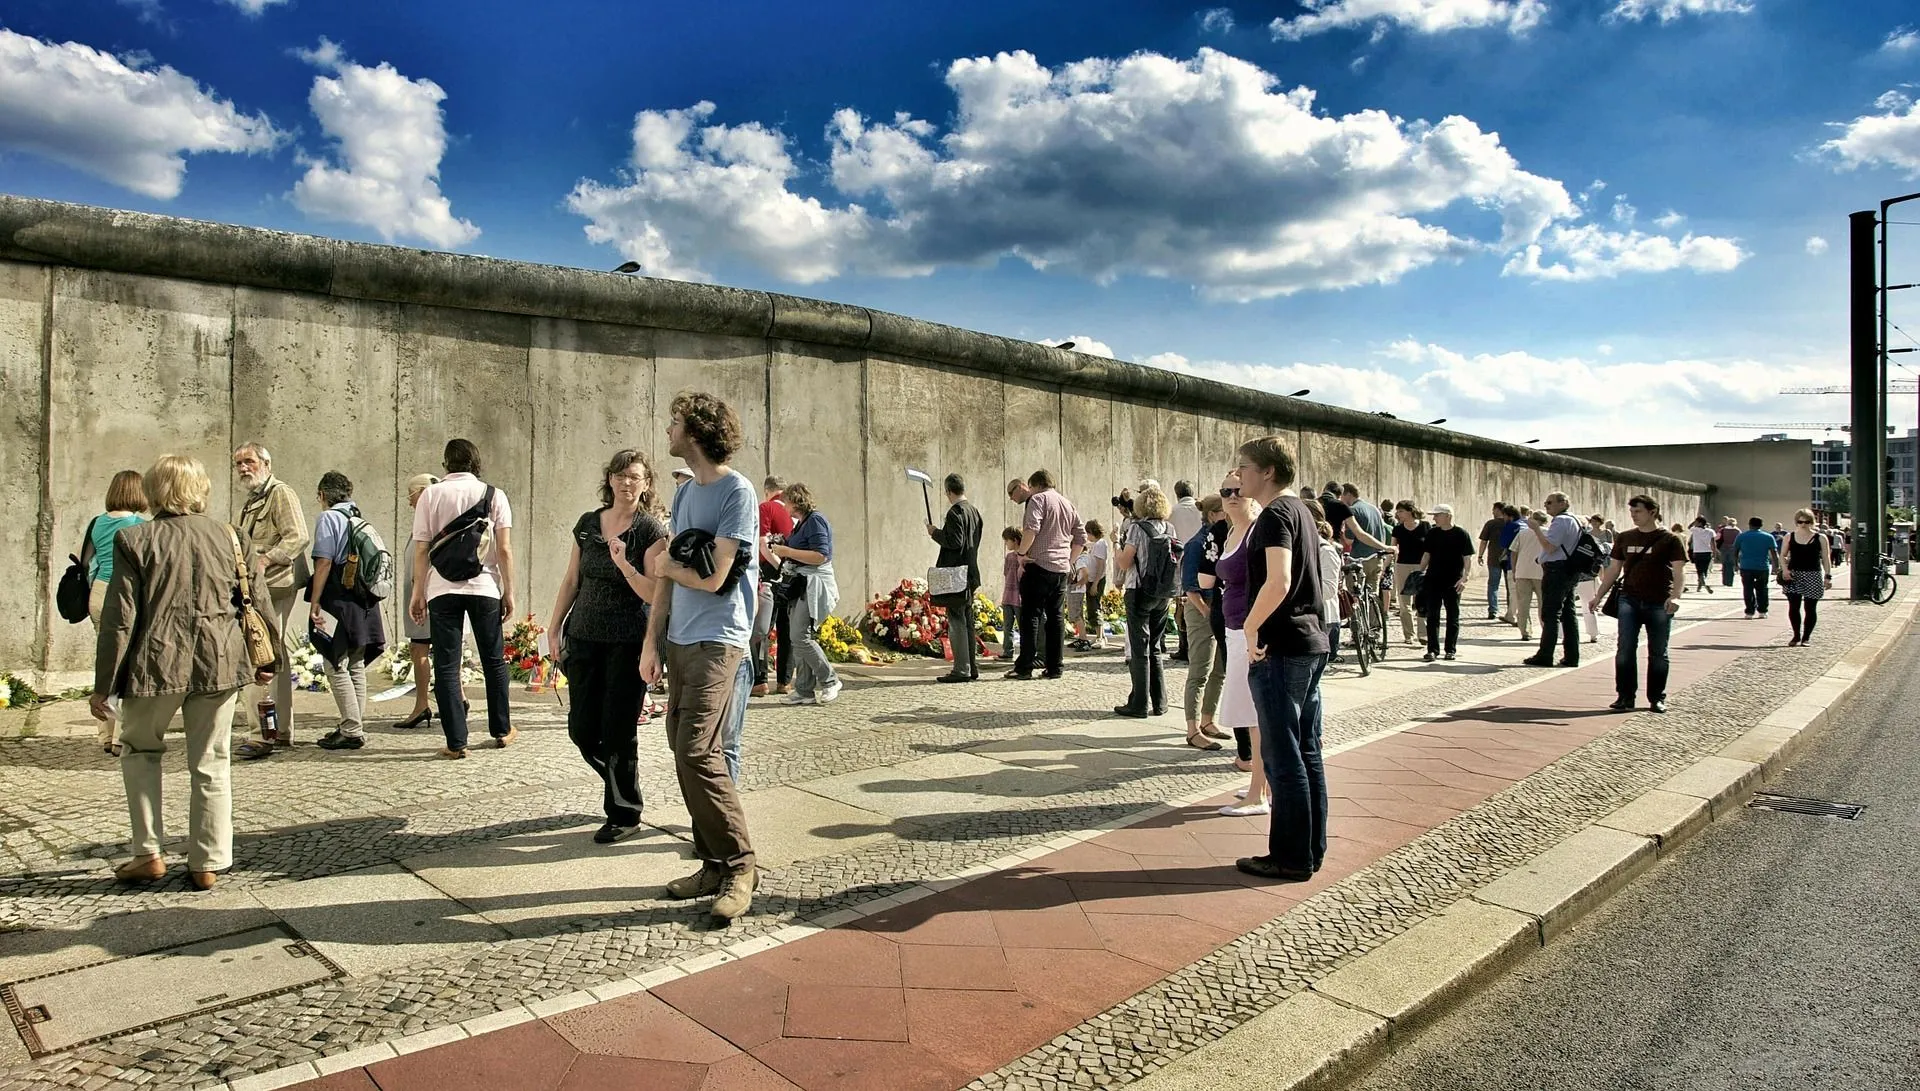 East Berlin Border guards did not allow East Berliners to cross the Berlin Wall.